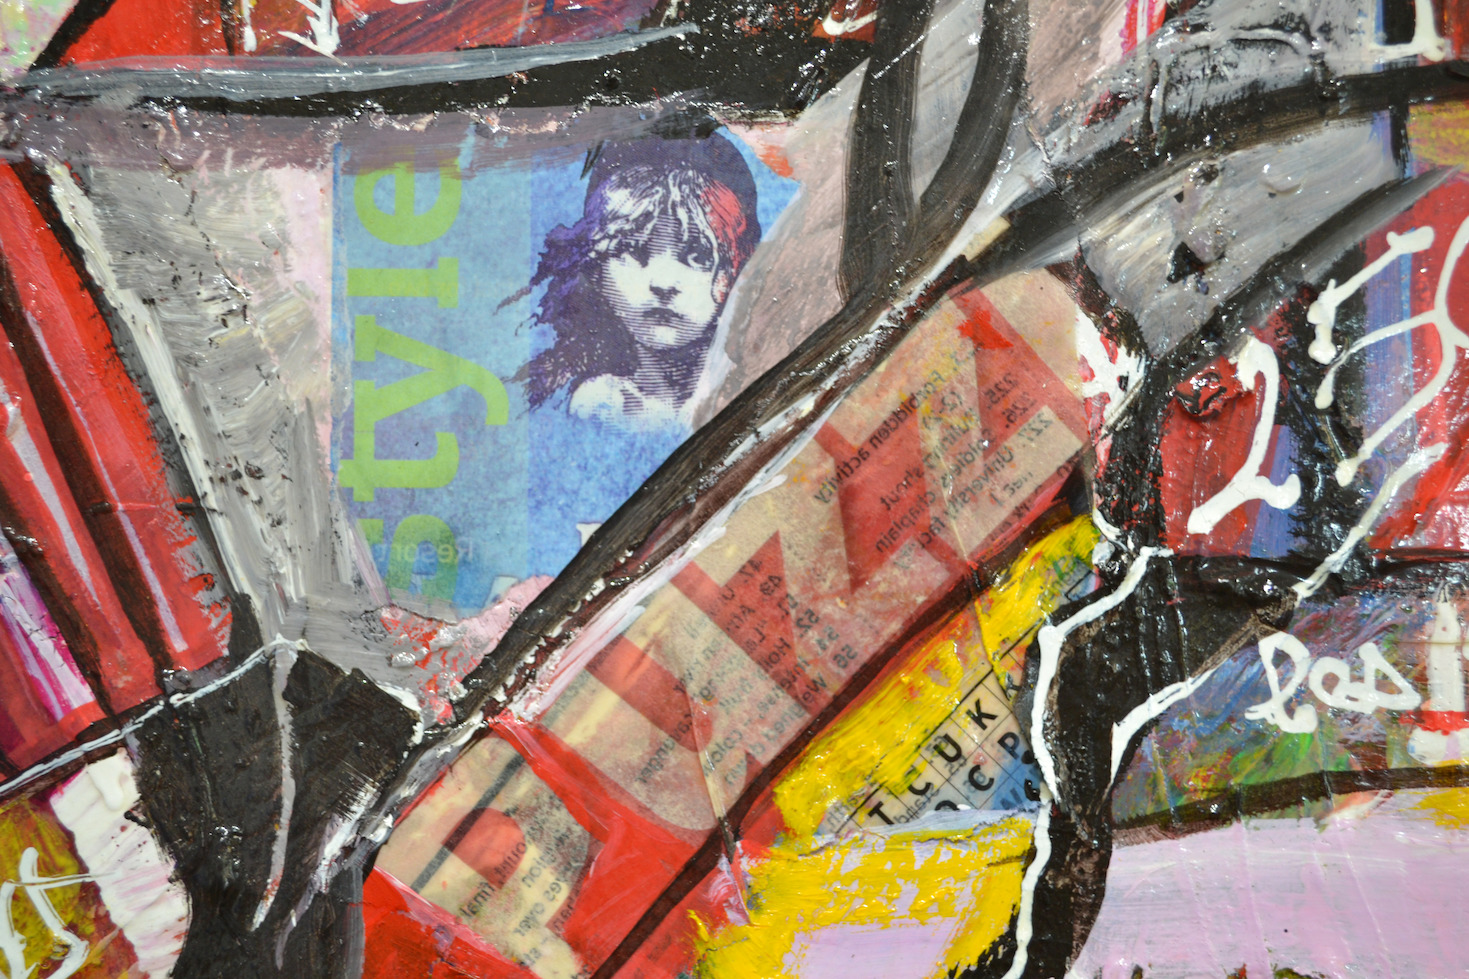 Close Up Detail Of Acrylic And Collage Painting "Signs" By Lucette Dalozzo